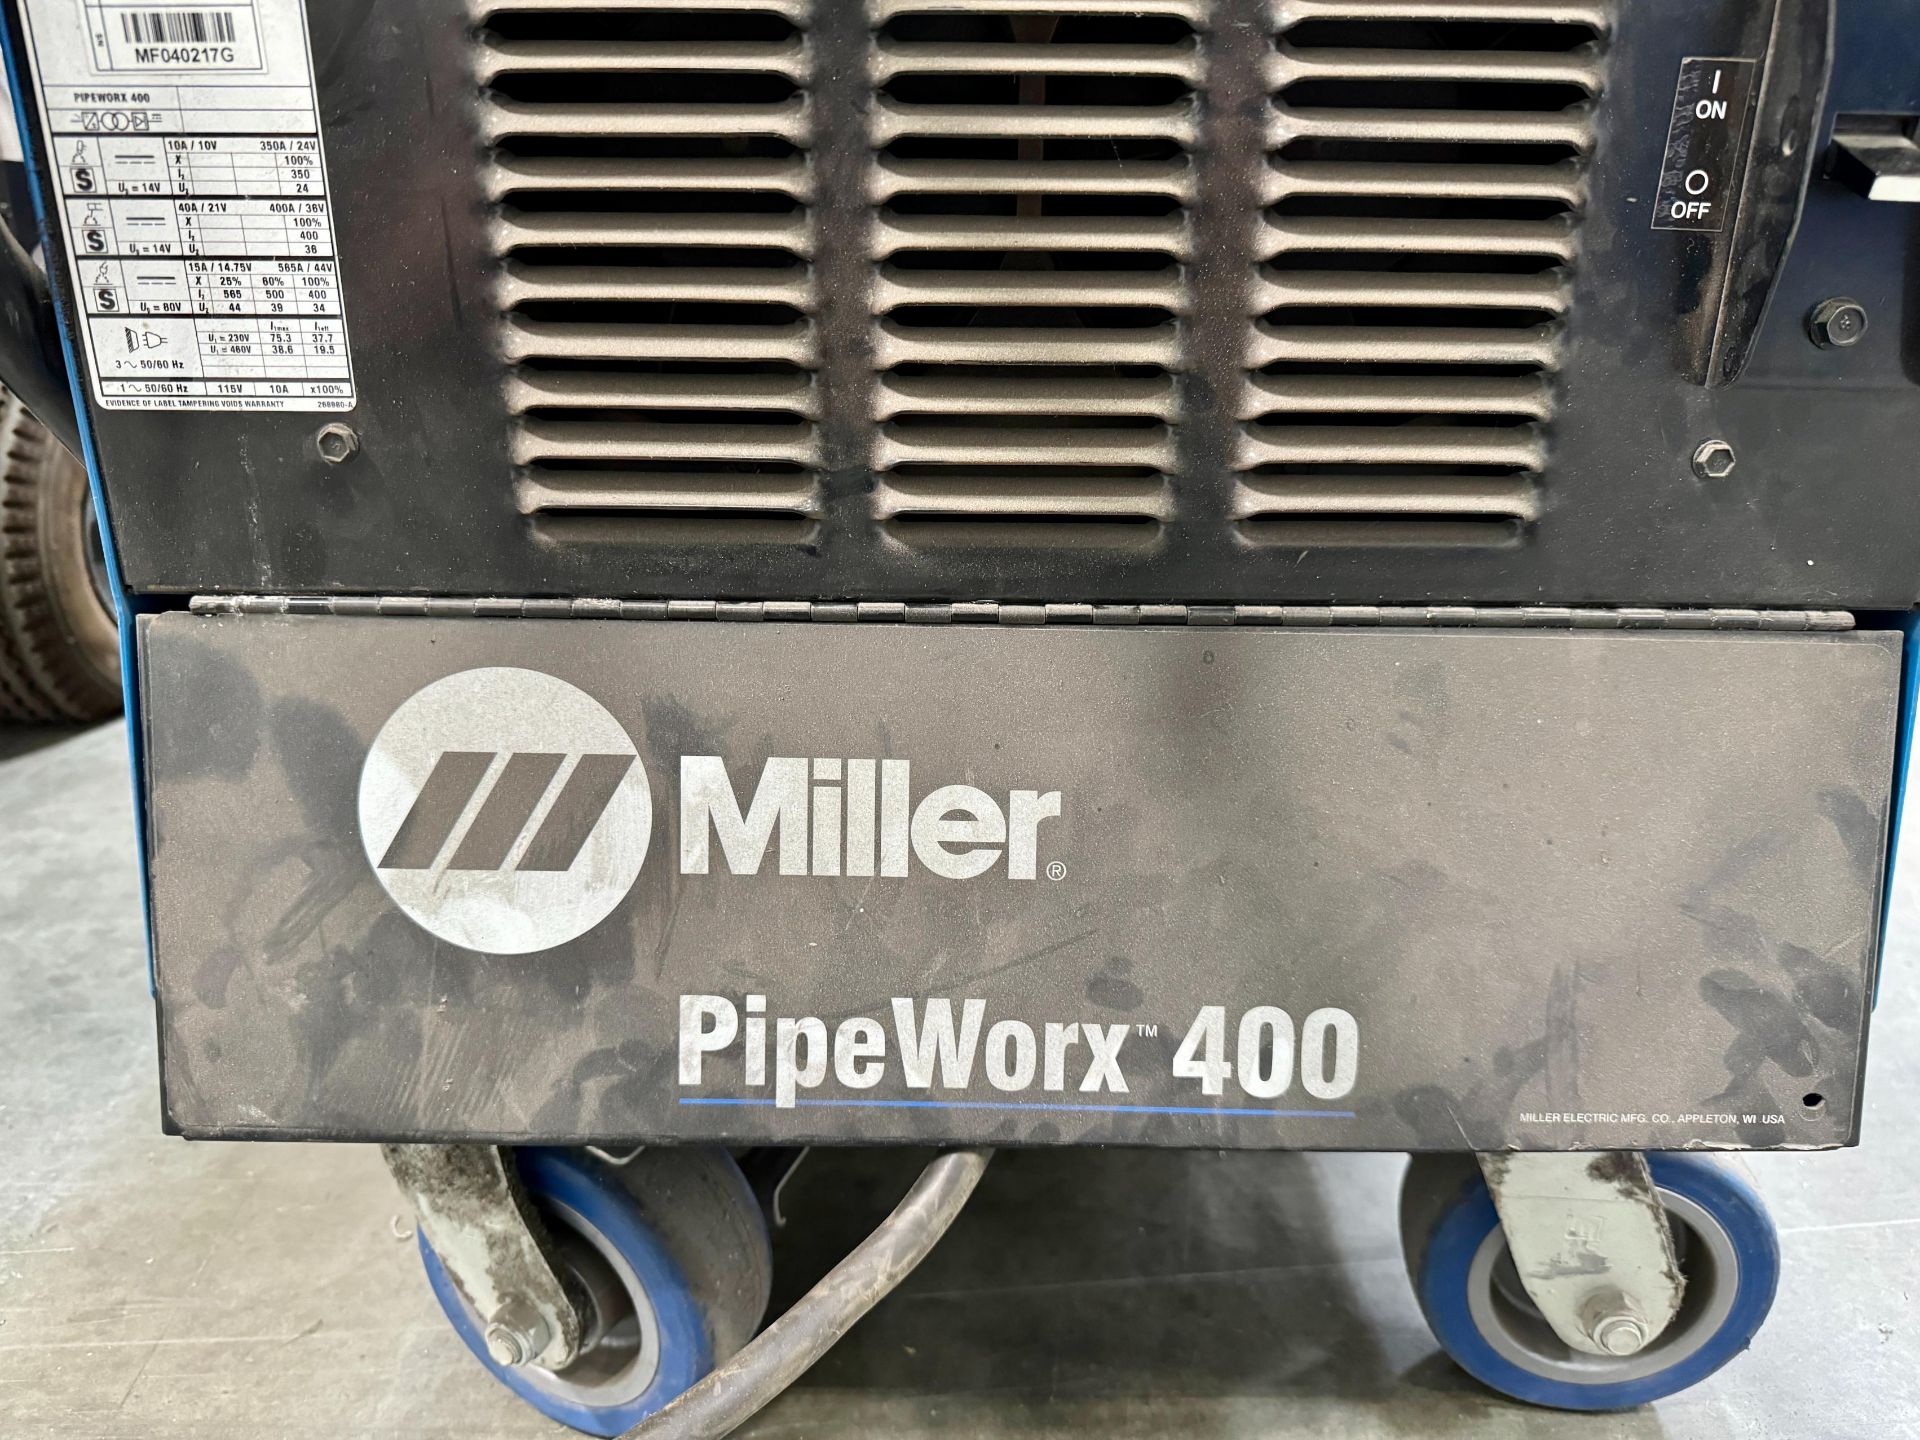 MILLER PIPEWORX 400 WELDER, S/N MF040217C, W/ WIRE FEEDER, OXY TANKS ARE NOT INCLUDED - Image 6 of 8